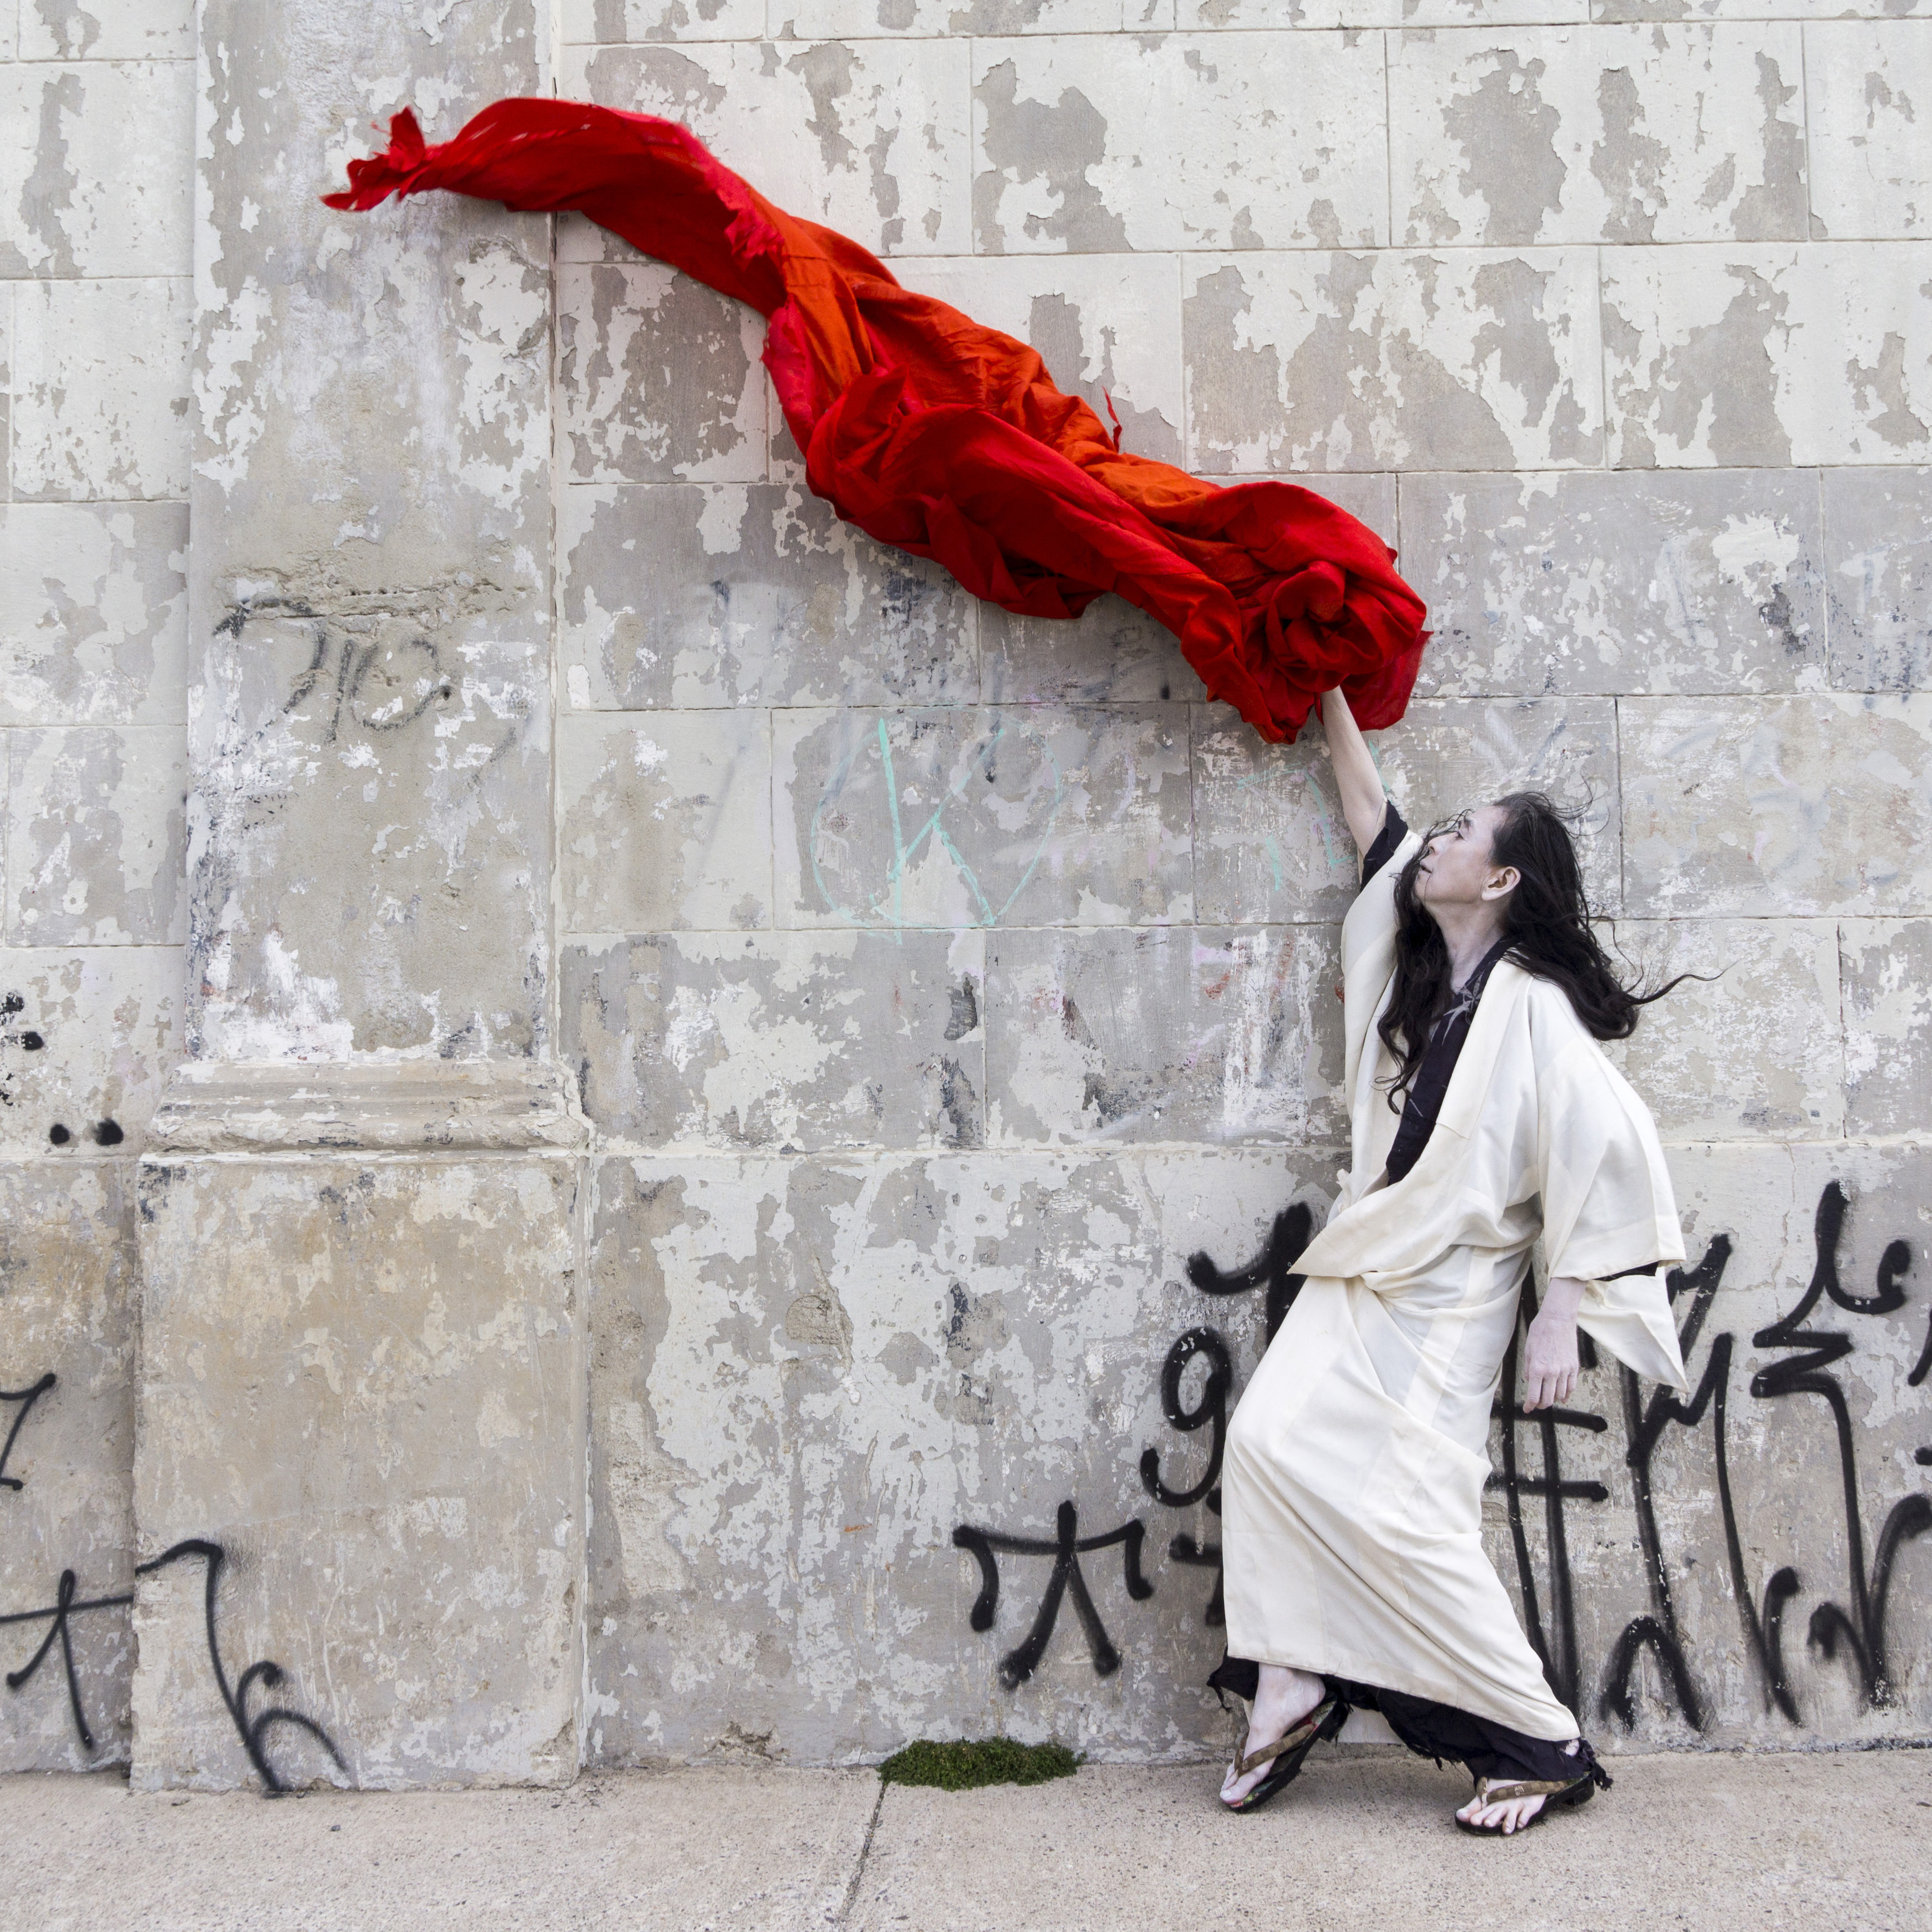 A Japanese woman poses lyrically in an urban street with a red textile